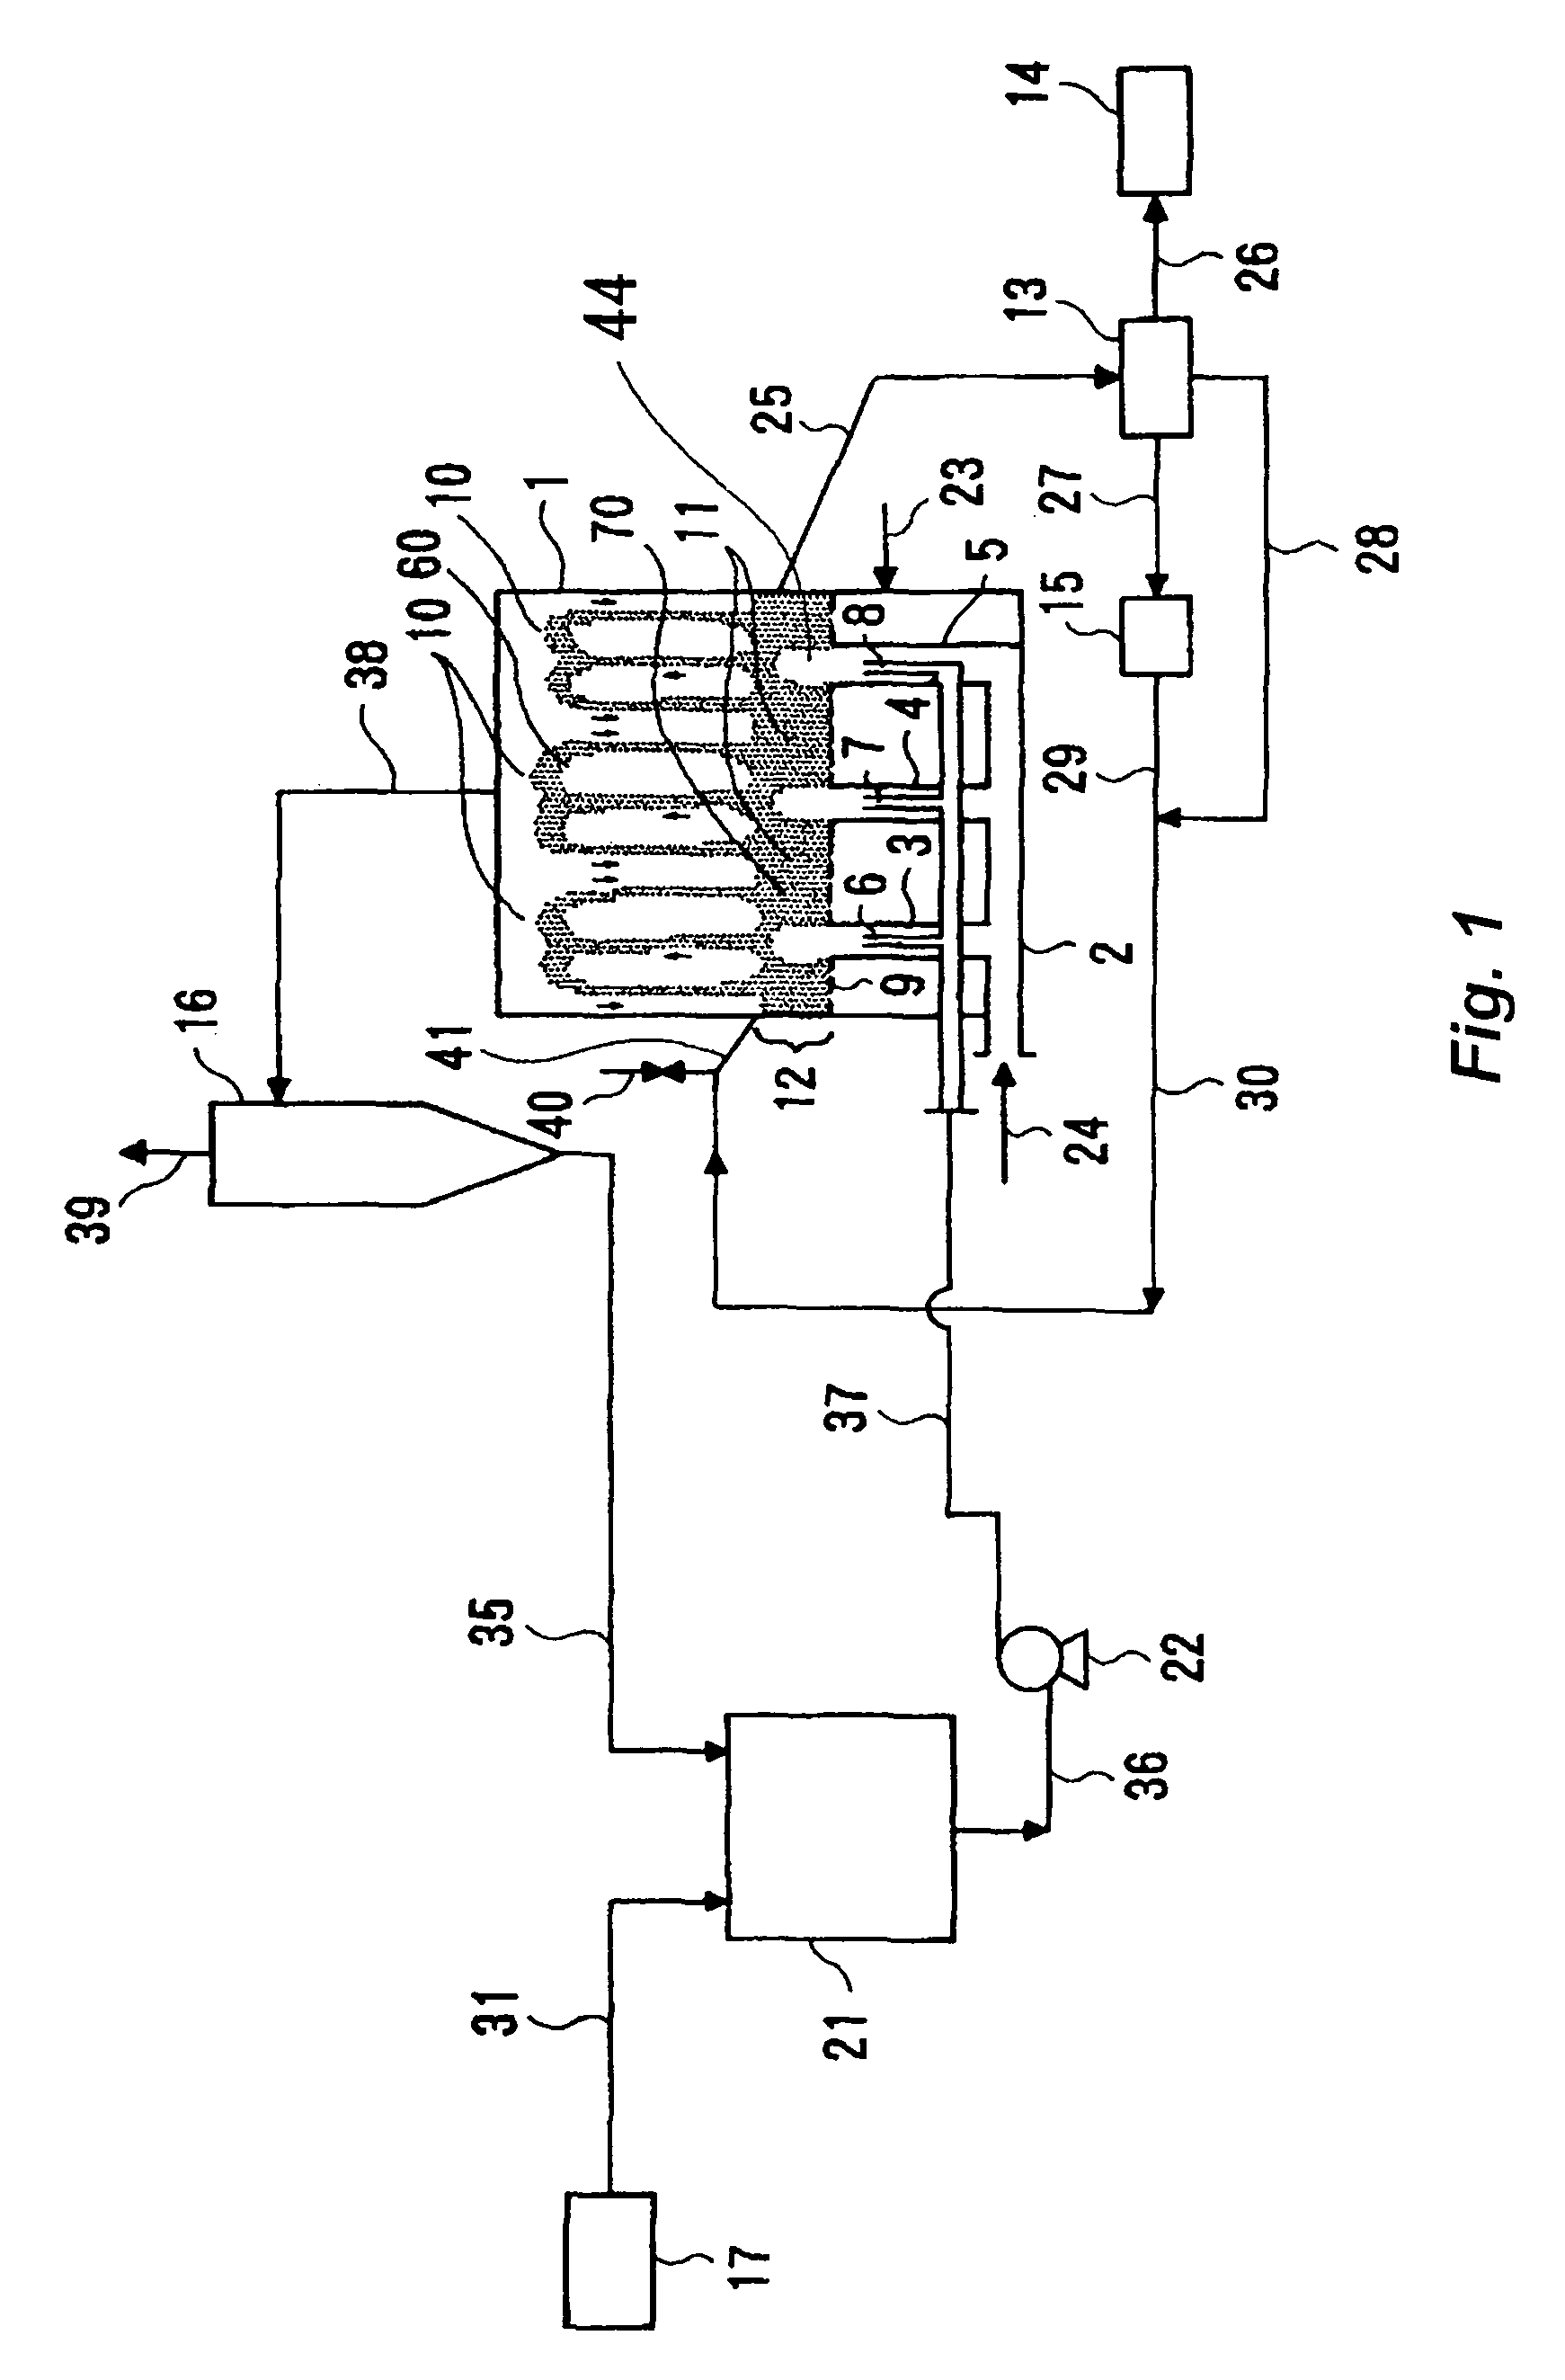 Method of granulation with a fluidized bed granulator